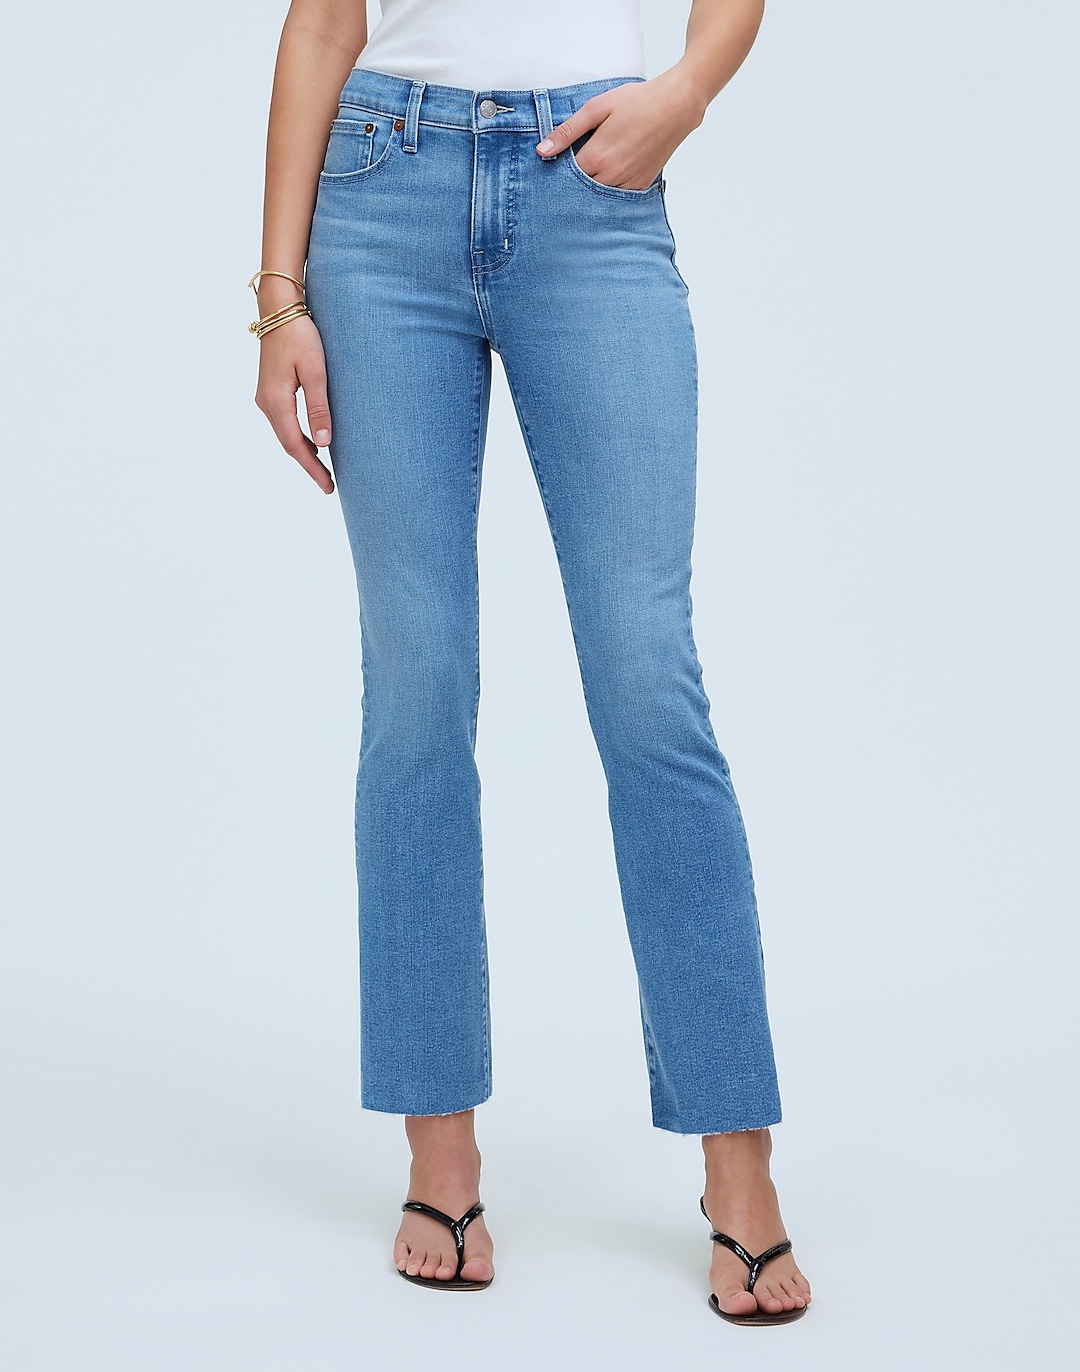 Kick Out Crop Jeans in Corley Wash: Raw-Hem Edition | Madewell